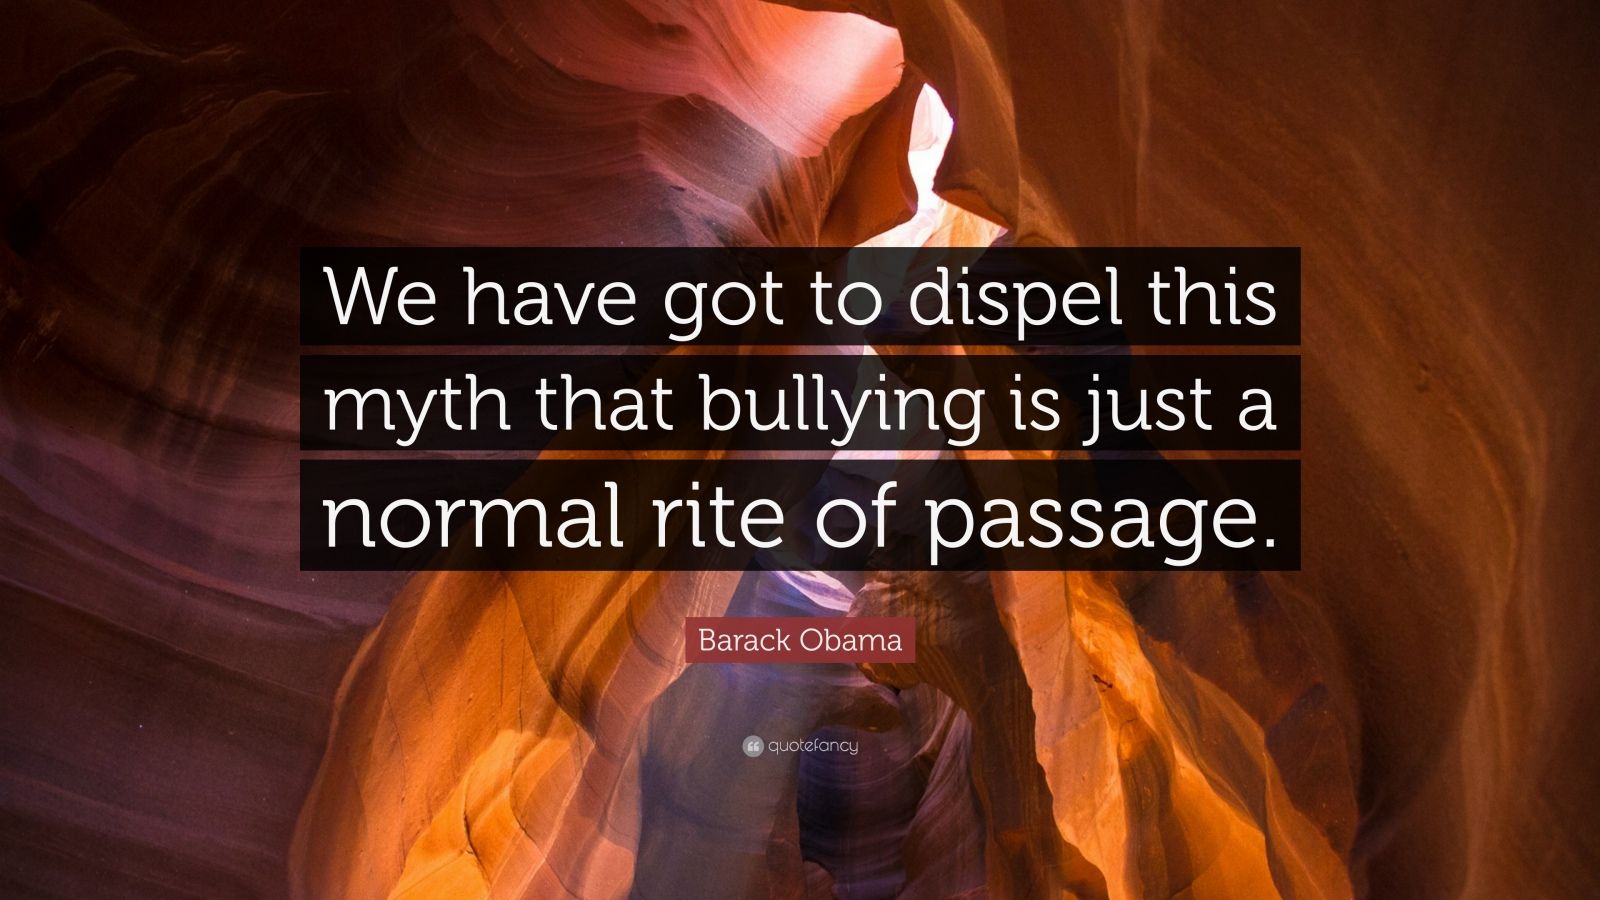 Barack Obama Quote “we Have Got To Dispel This Myth That Bullying Is Just A Normal Rite Of